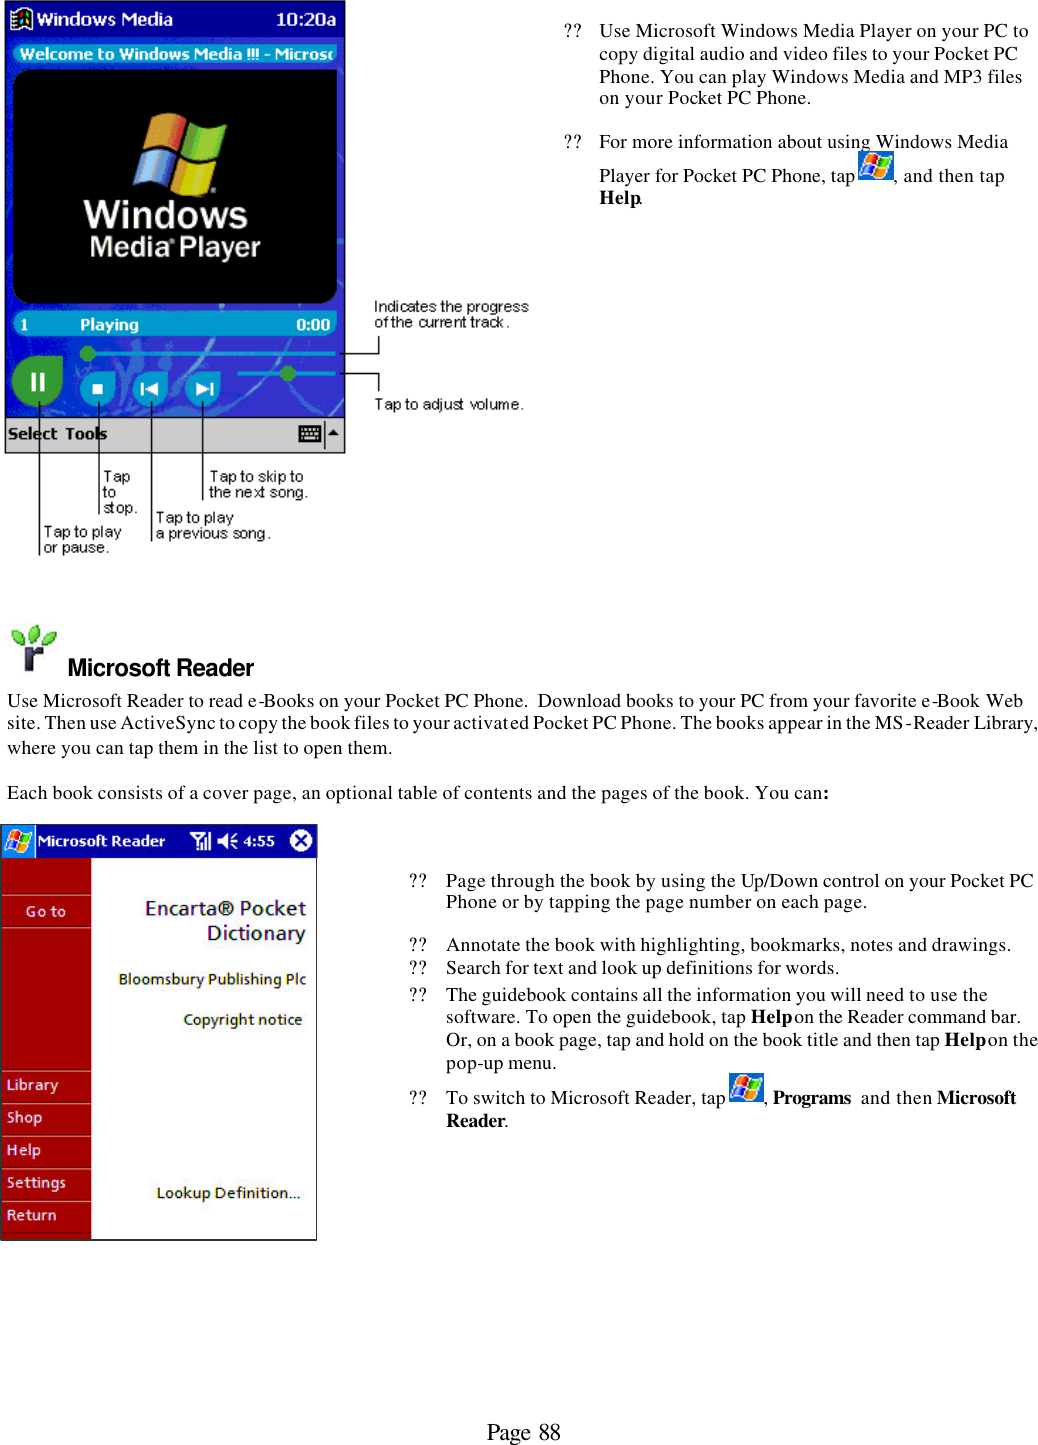 Page 88   ?? Use Microsoft Windows Media Player on your PC to copy digital audio and video files to your Pocket PC Phone. You can play Windows Media and MP3 files on your Pocket PC Phone. ?? For more information about using Windows Media Player for Pocket PC Phone, tap  , and then tap Help.   Microsoft Reader Use Microsoft Reader to read e-Books on your Pocket PC Phone.  Download books to your PC from your favorite e-Book Web site. Then use ActiveSync to copy the book files to your activated Pocket PC Phone. The books appear in the MS-Reader Library, where you can tap them in the list to open them.   Each book consists of a cover page, an optional table of contents and the pages of the book. You can:    ?? Page through the book by using the Up/Down control on your Pocket PC Phone or by tapping the page number on each page. ?? Annotate the book with highlighting, bookmarks, notes and drawings. ?? Search for text and look up definitions for words. ?? The guidebook contains all the information you will need to use the software. To open the guidebook, tap Help on the Reader command bar. Or, on a book page, tap and hold on the book title and then tap Help on the pop-up menu. ?? To switch to Microsoft Reader, tap  , Programs  and then Microsoft Reader.    